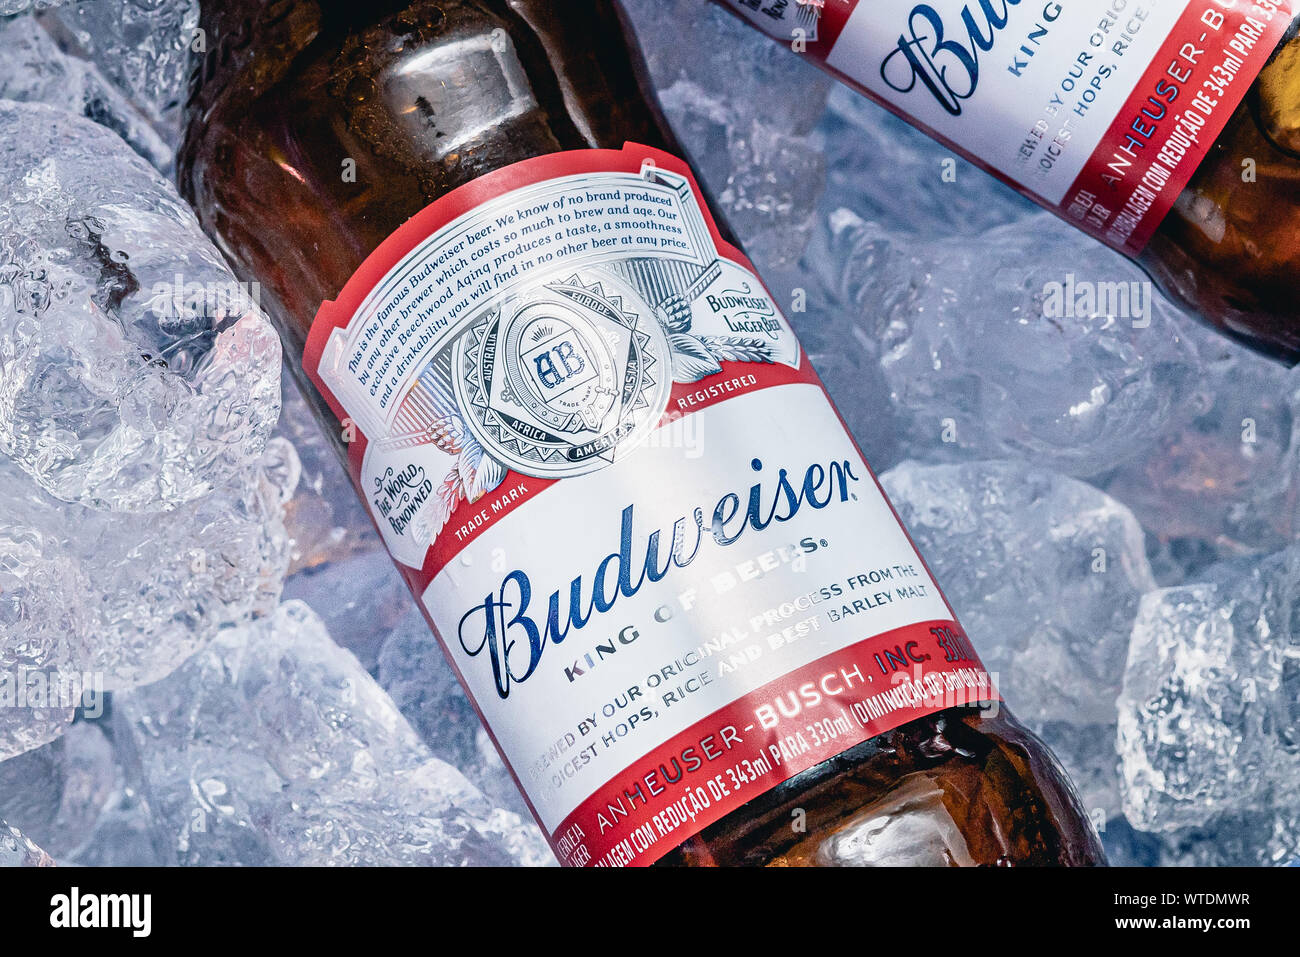 Brasilia, Federal District - Brazil. Circa 2019. Photograph of two Budweiser beer bottles in a cooler with ice. Stock Photo